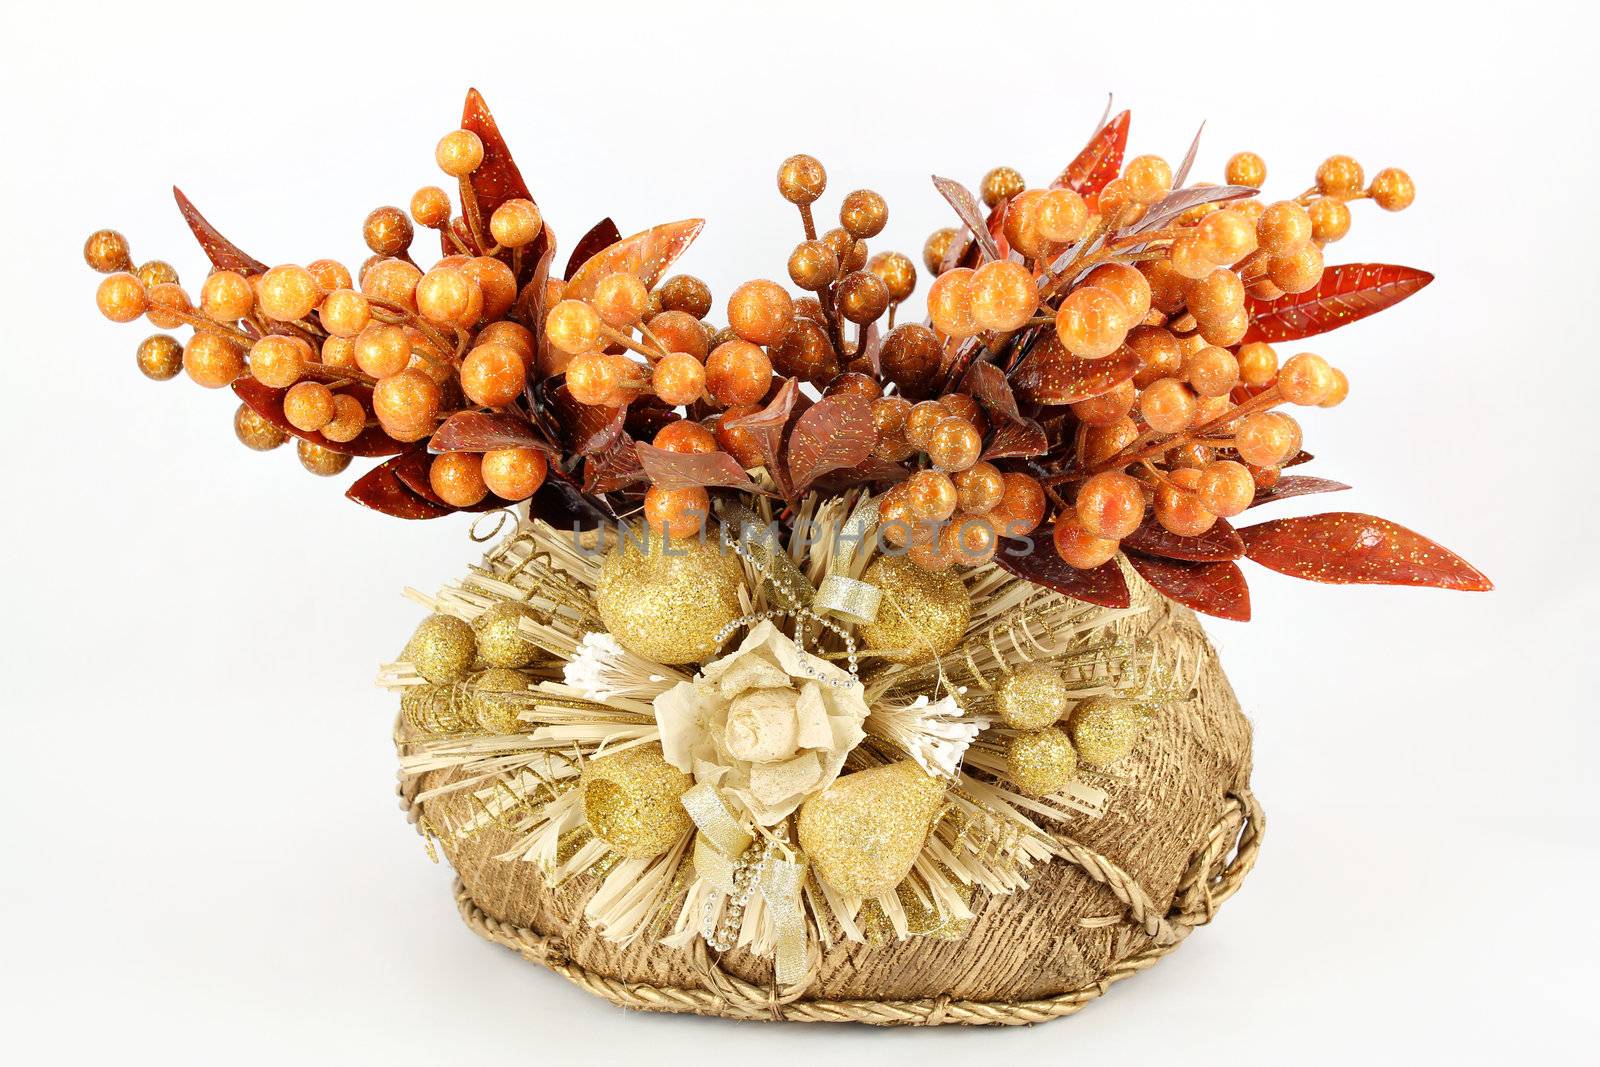 Christmas basket on white by goce